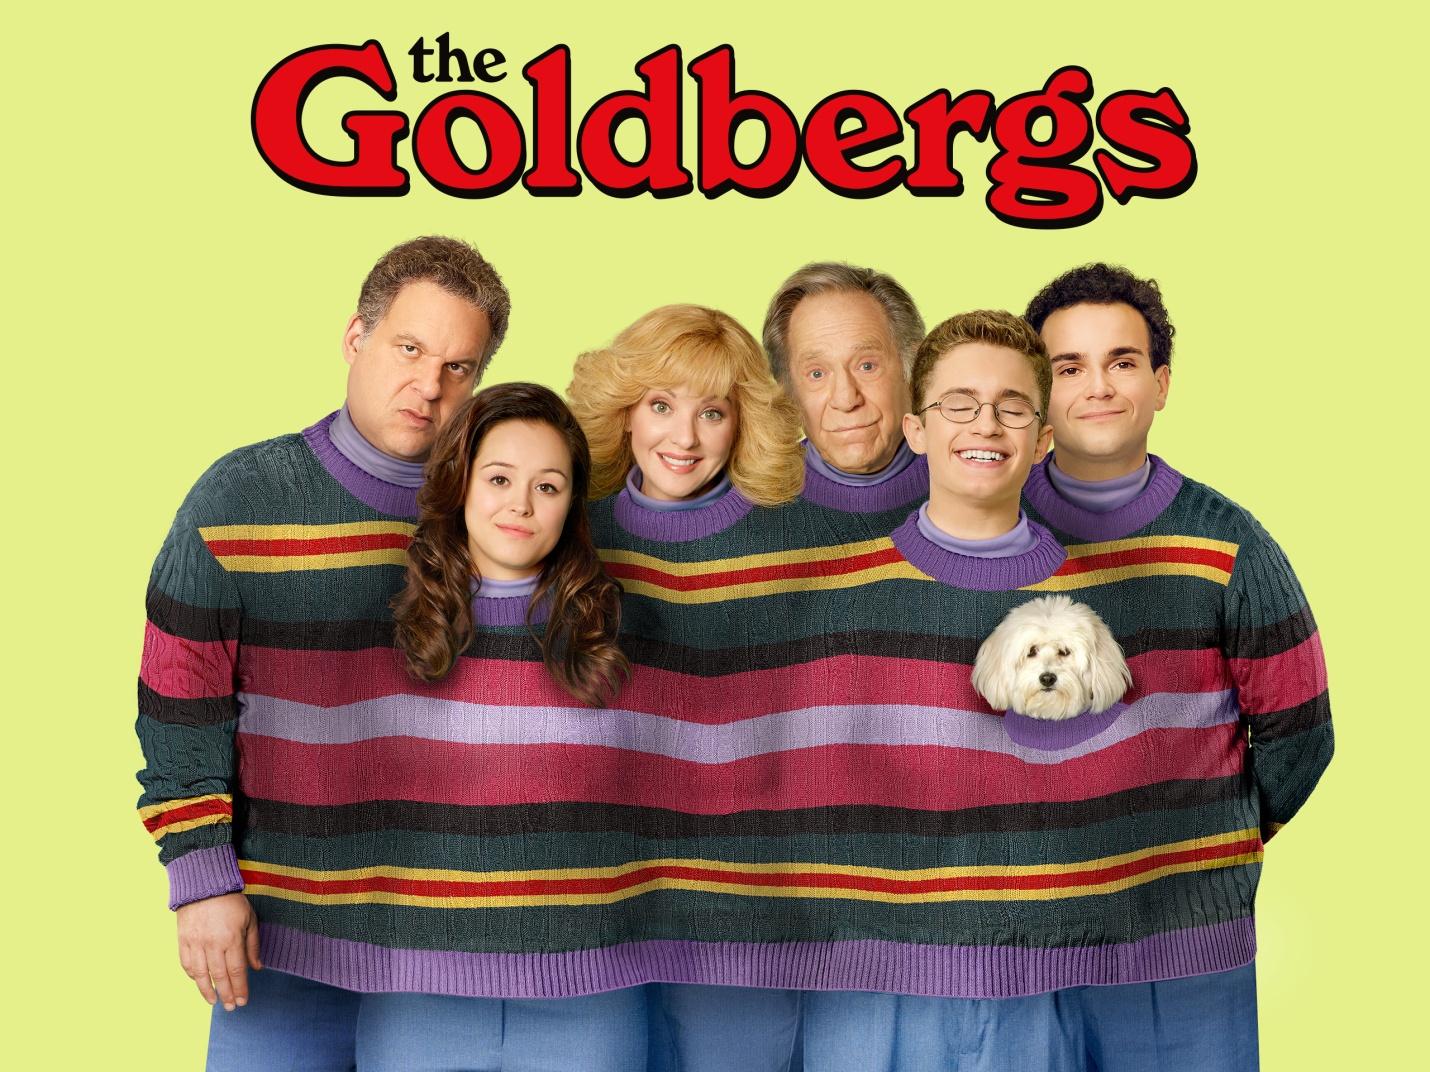 The Goldbergs Season 9 Episode 5; "An Itch Like No Other" Release Date